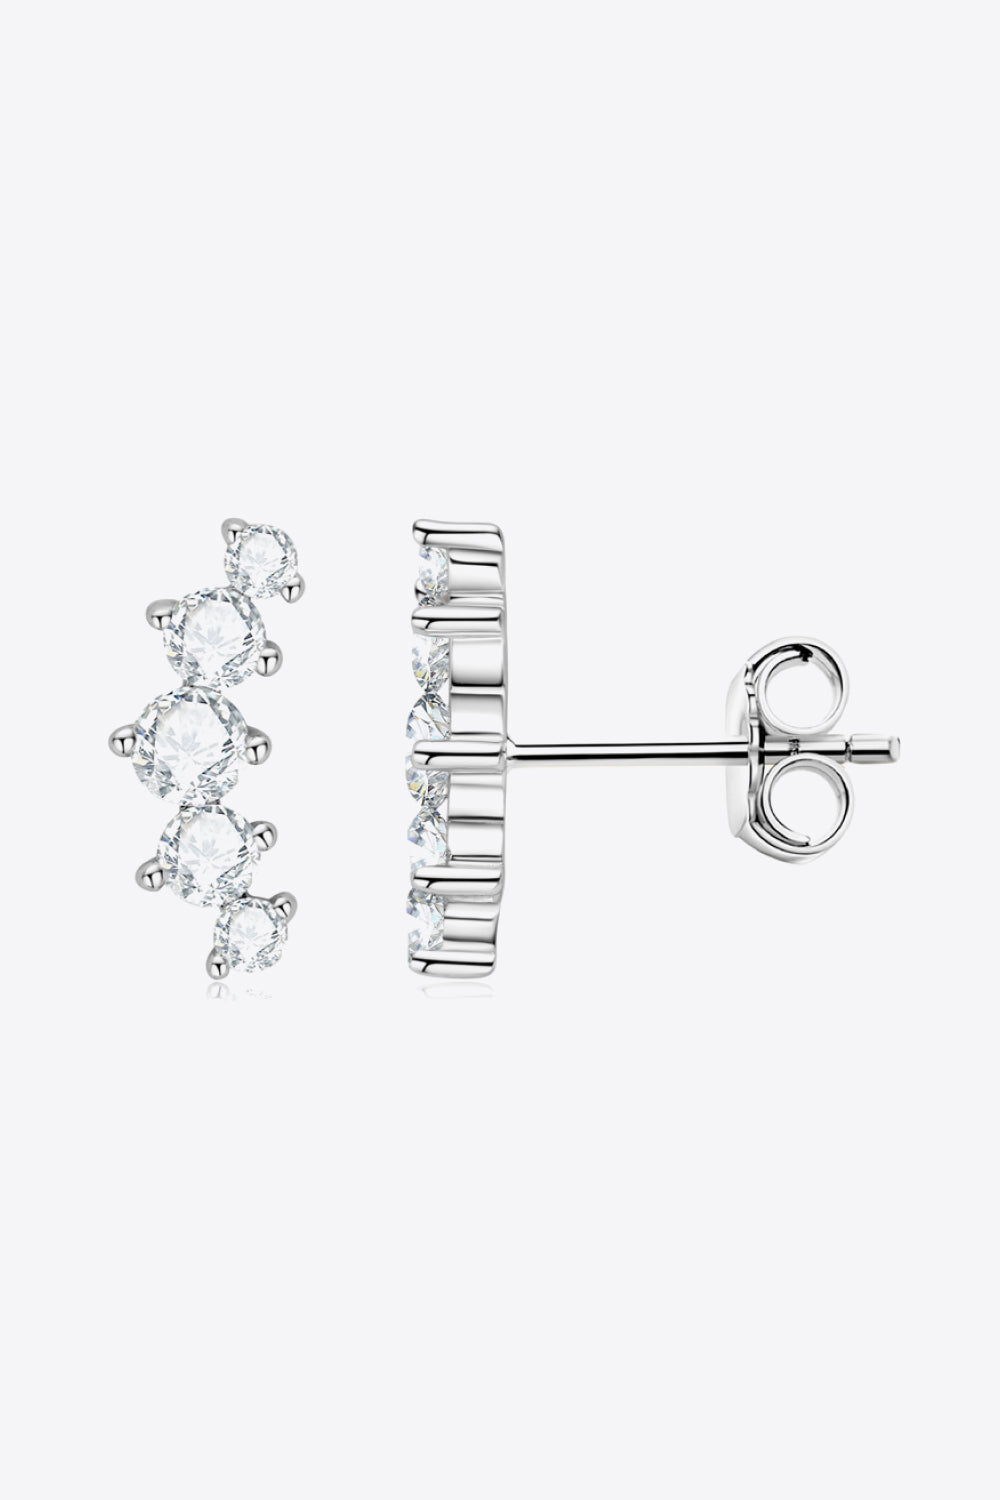 All You Need Moissanite Platinum-Plated Earrings - DromedarShop.com Online Boutique